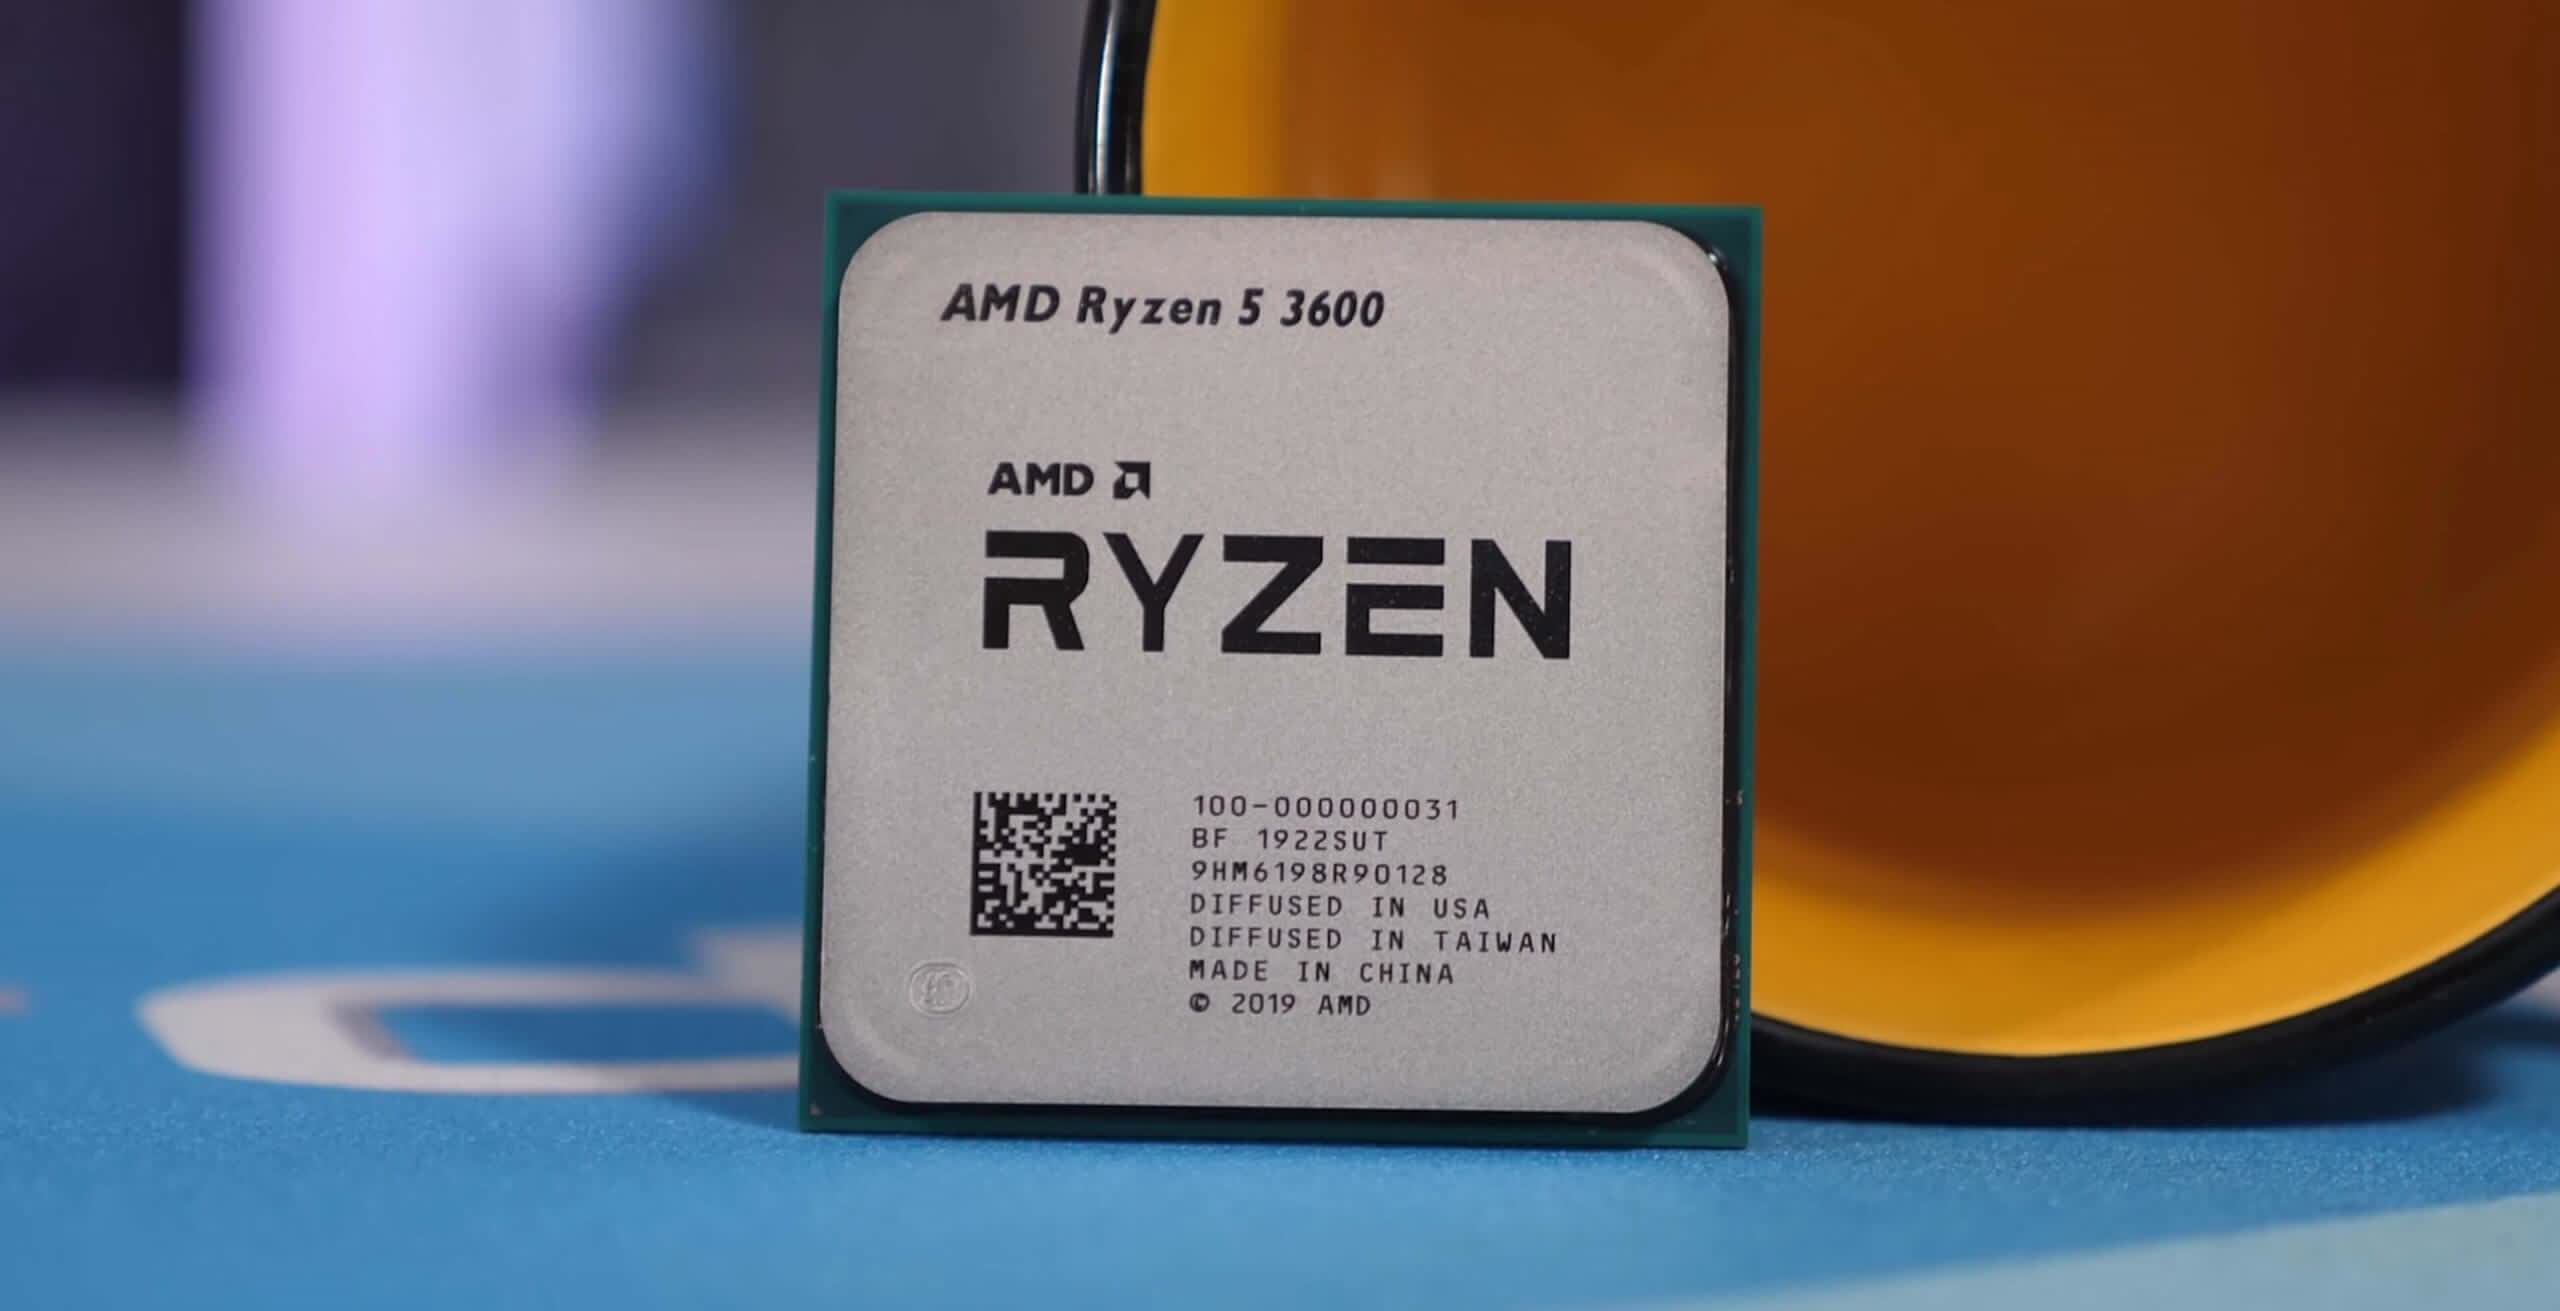 AMD Ryzen 5 3600 + Radeon RX 6800: Tested at 1080p, 1440p and 4K 